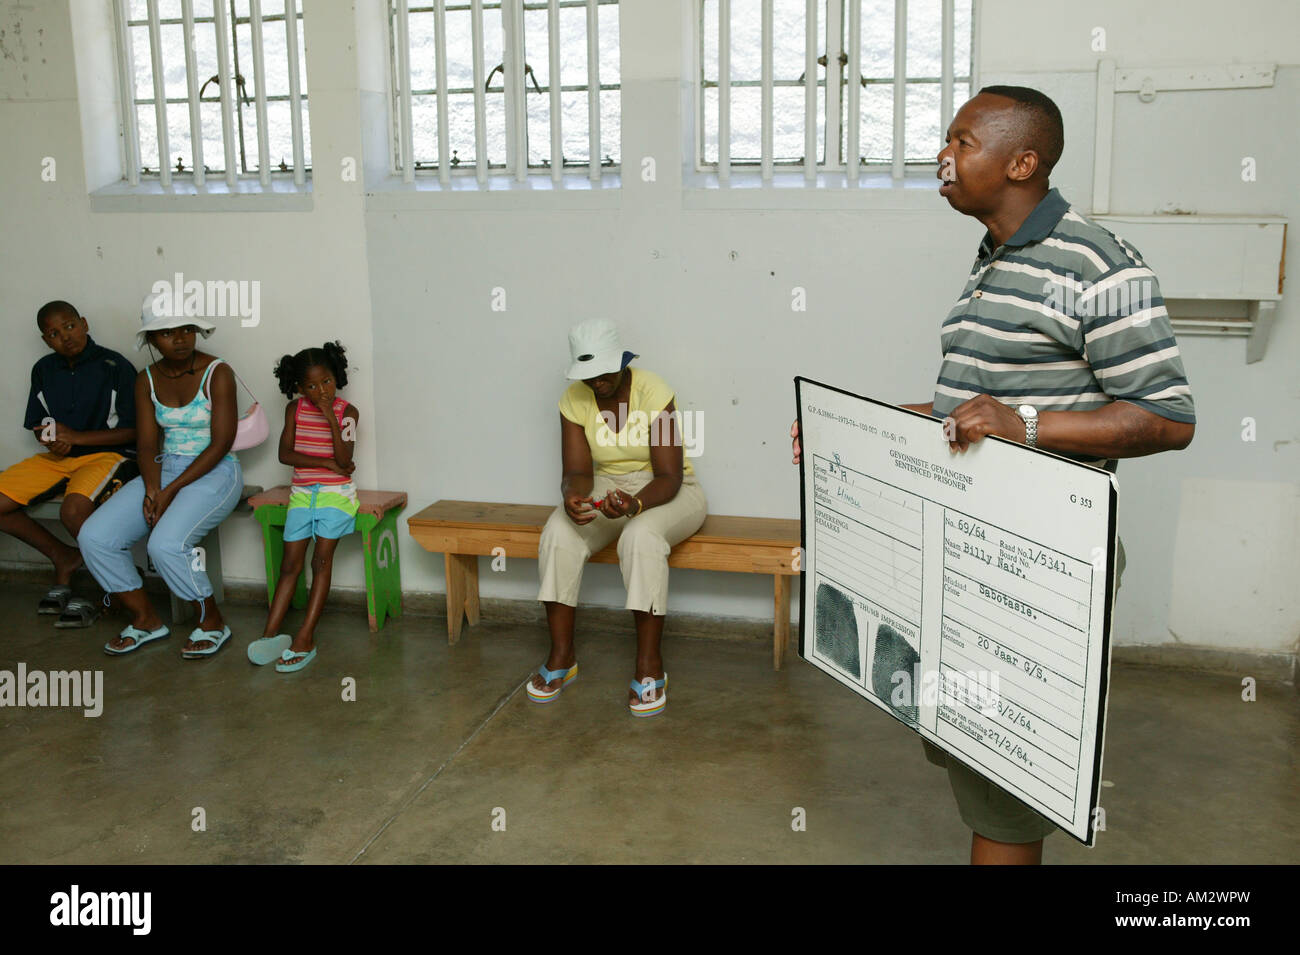 Guidances inform about living conditions on the former prison island Robben Island, South Africa Stock Photo